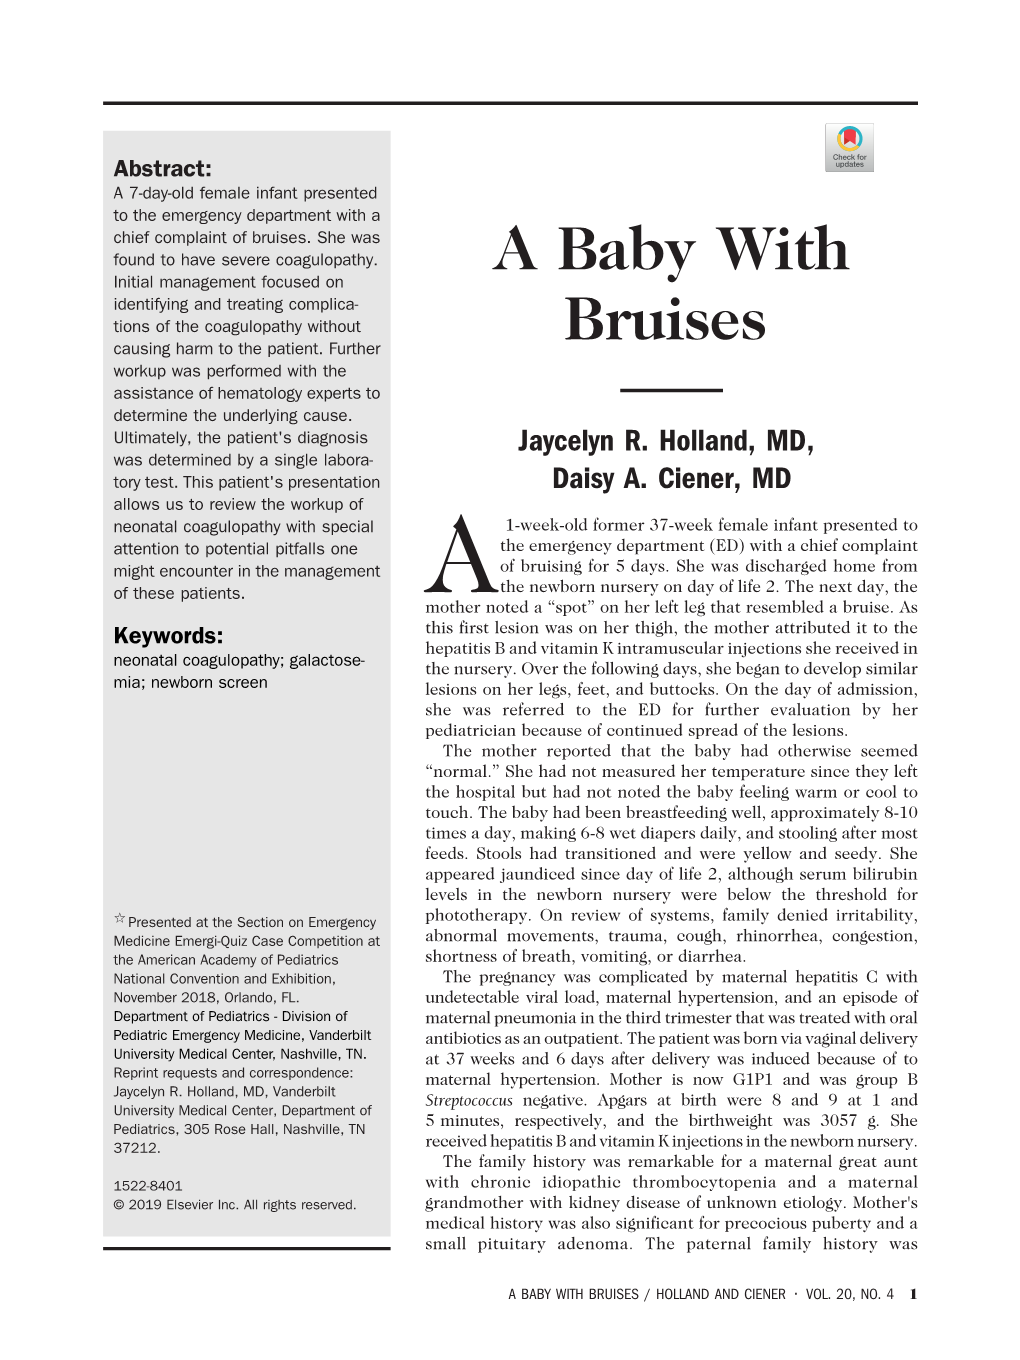 A Baby with Bruises / Holland and Ciener • Vol